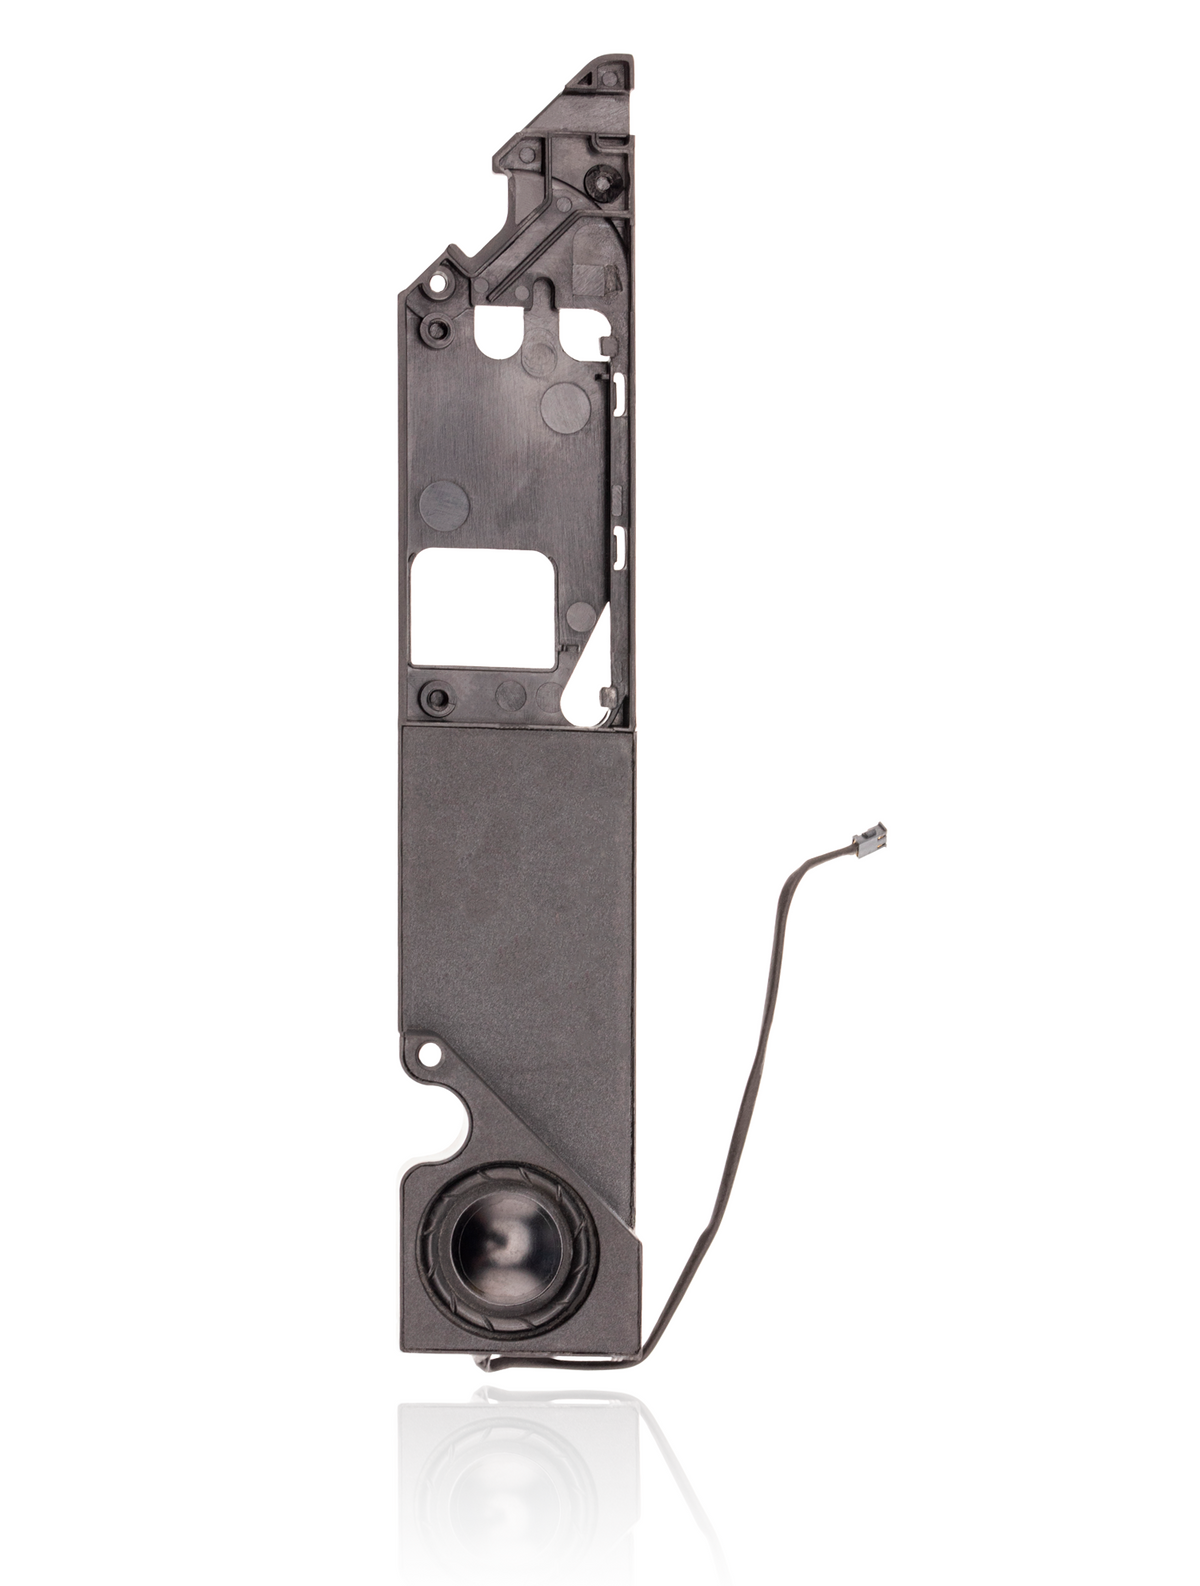 AIRPORT CARD BRACKET WITH SPEAKER FOR MACBOOK UNIBODY 13" A1342 (LATE 2009 / MID 2010)